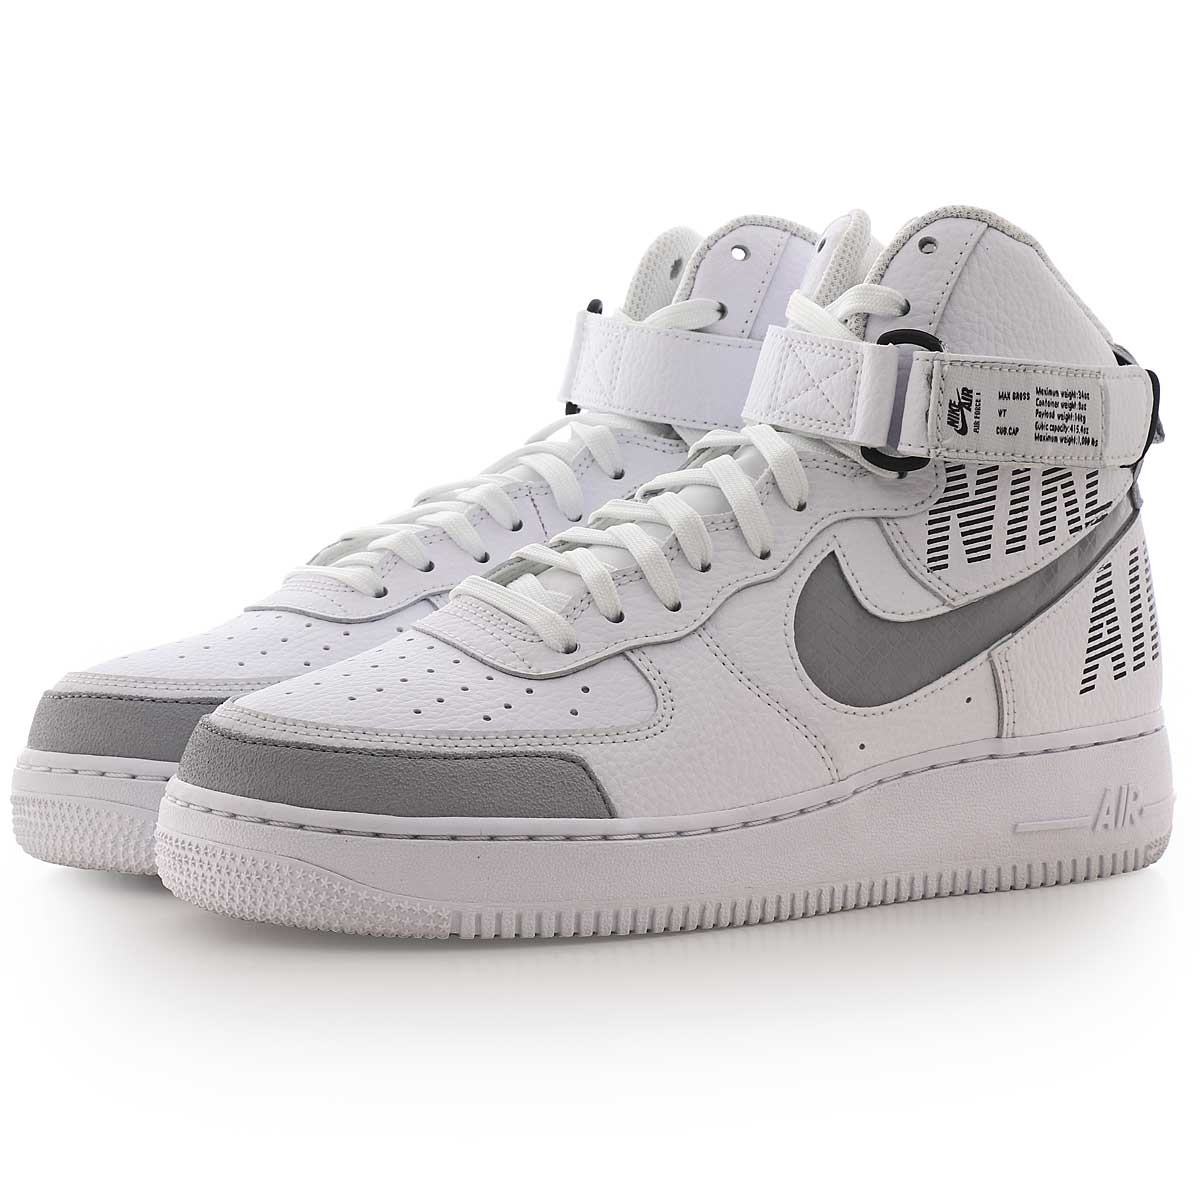 Buy AIR FORCE 1 HIGH '07 2 for N/A 0.0 on KICKZ.com!